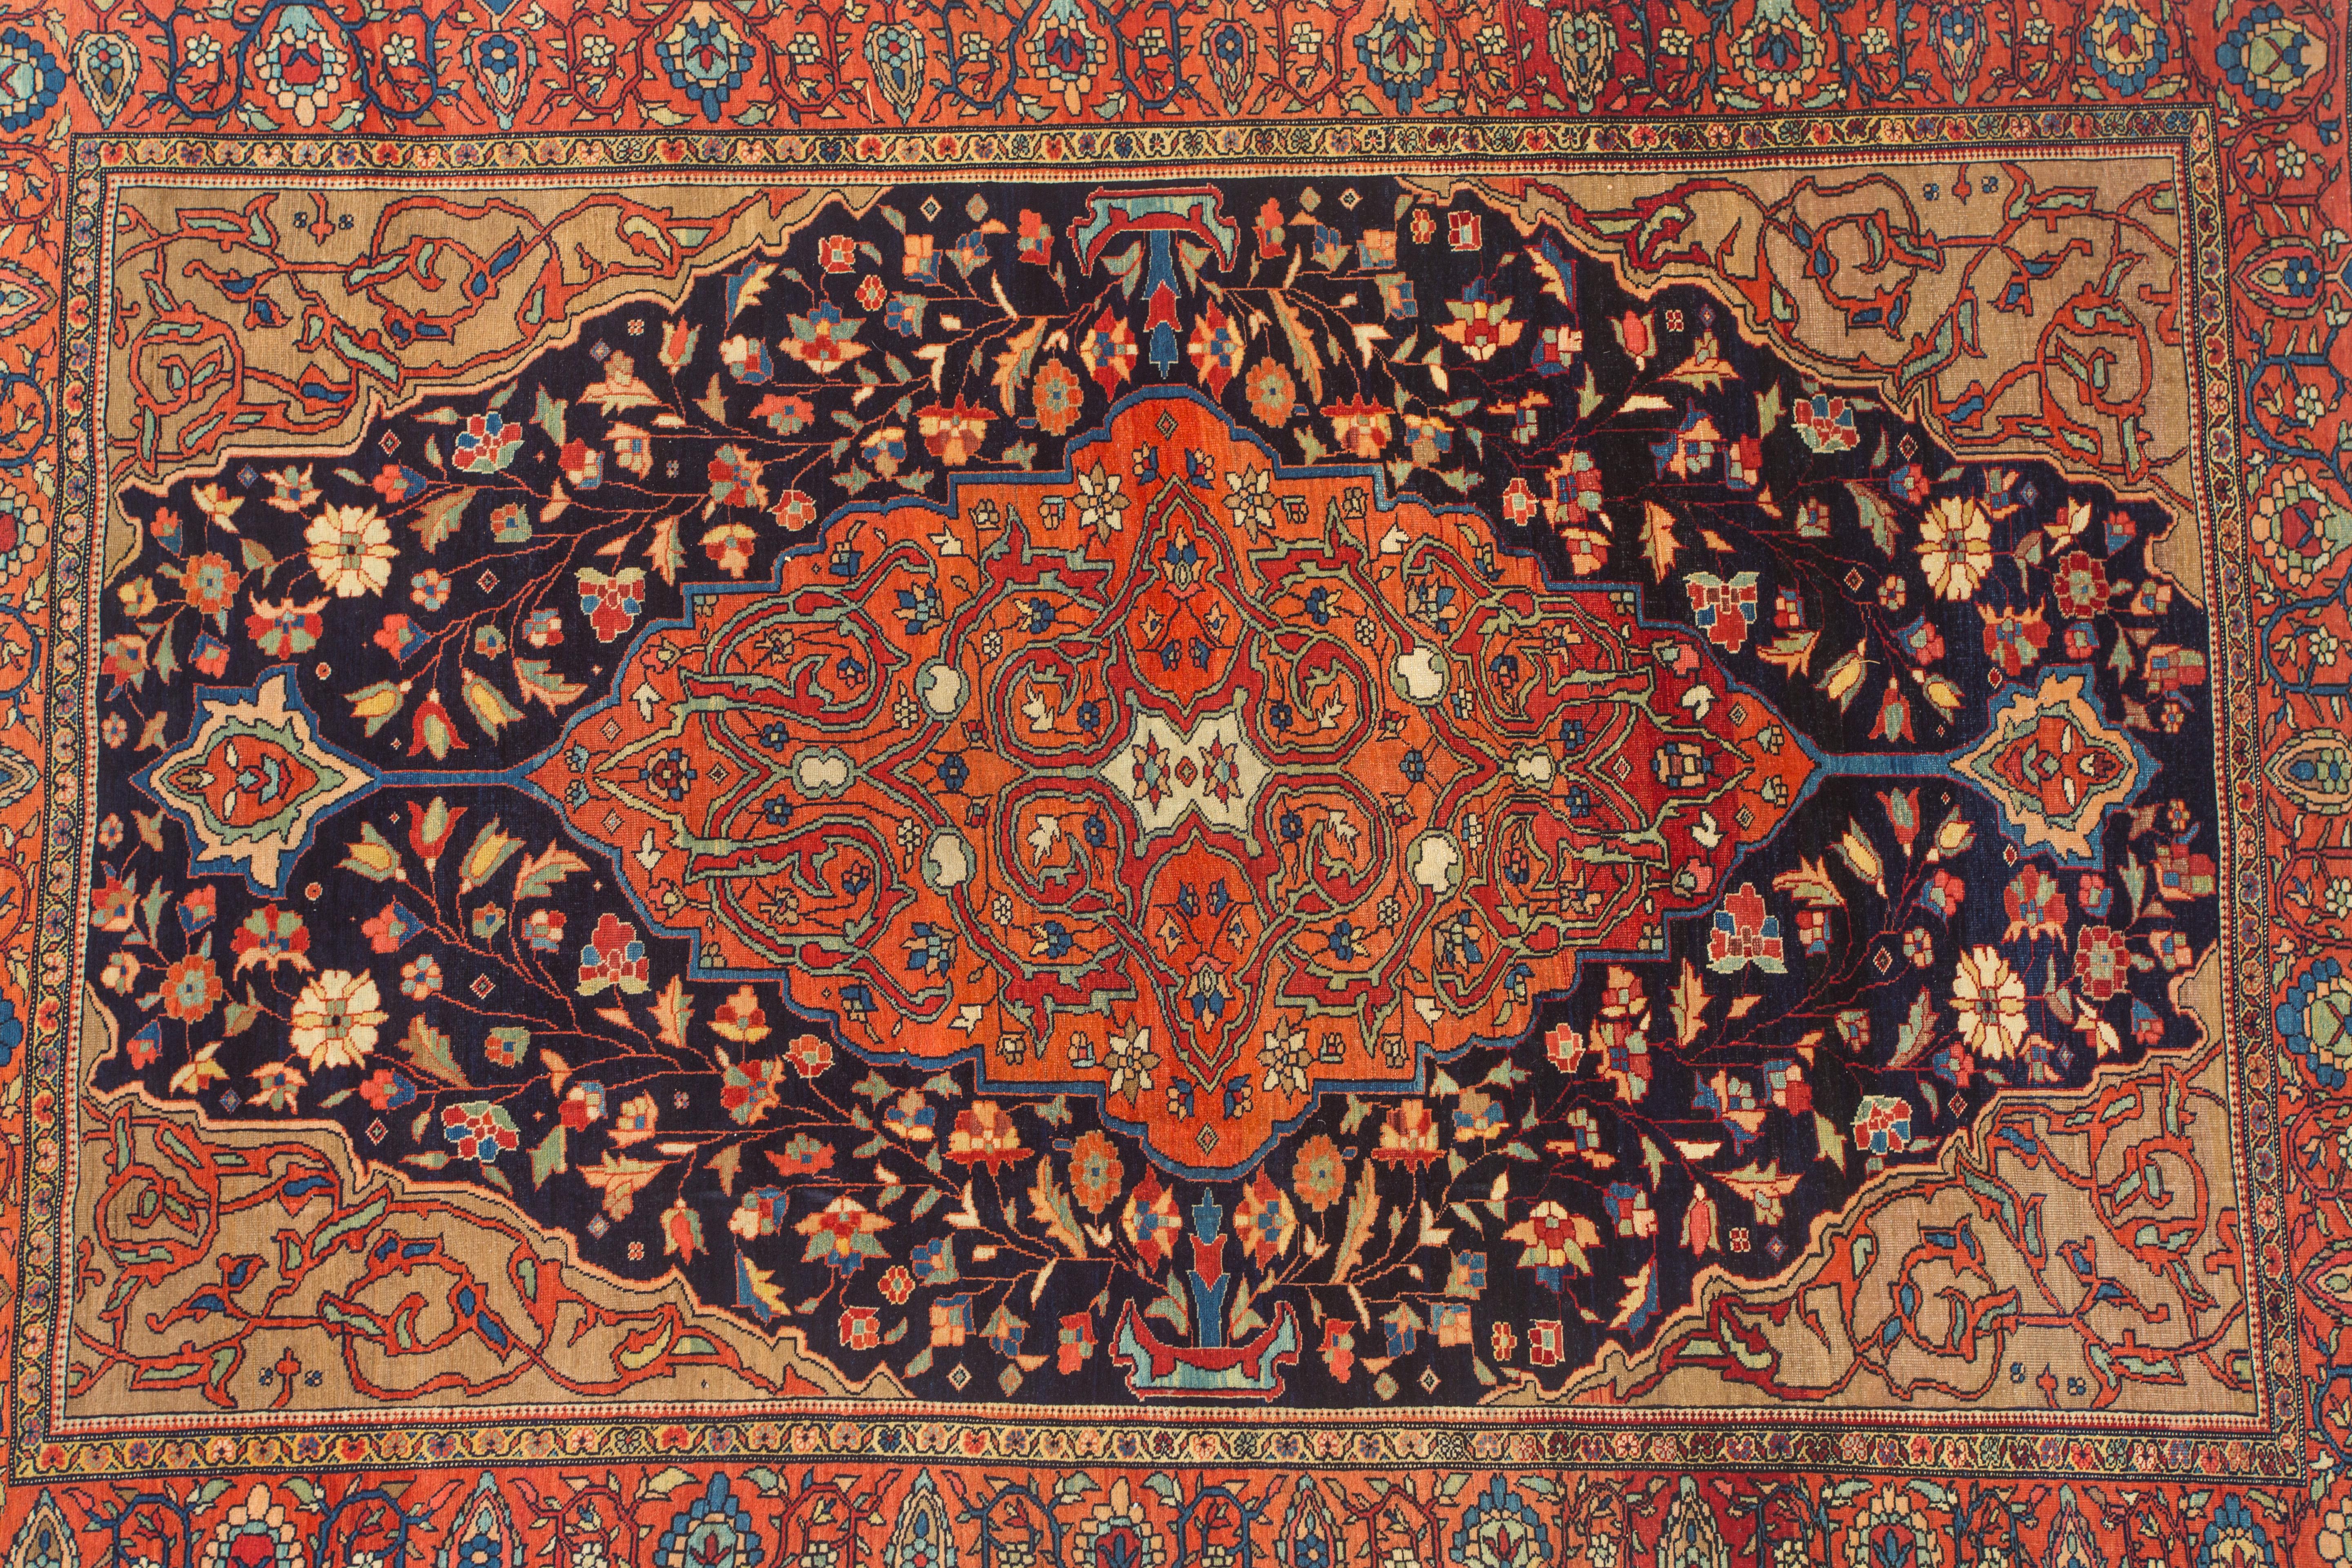 Ferahan Sarouk, 1870 :GLORIOUS FLOWERS 
.

From a German collector

Ferahan Sarouk carpets produced around the wider Arak (formerly Sultanabad) area from about 1850-1910 earned a deserved reputation as amongst the most desirable and imaginative